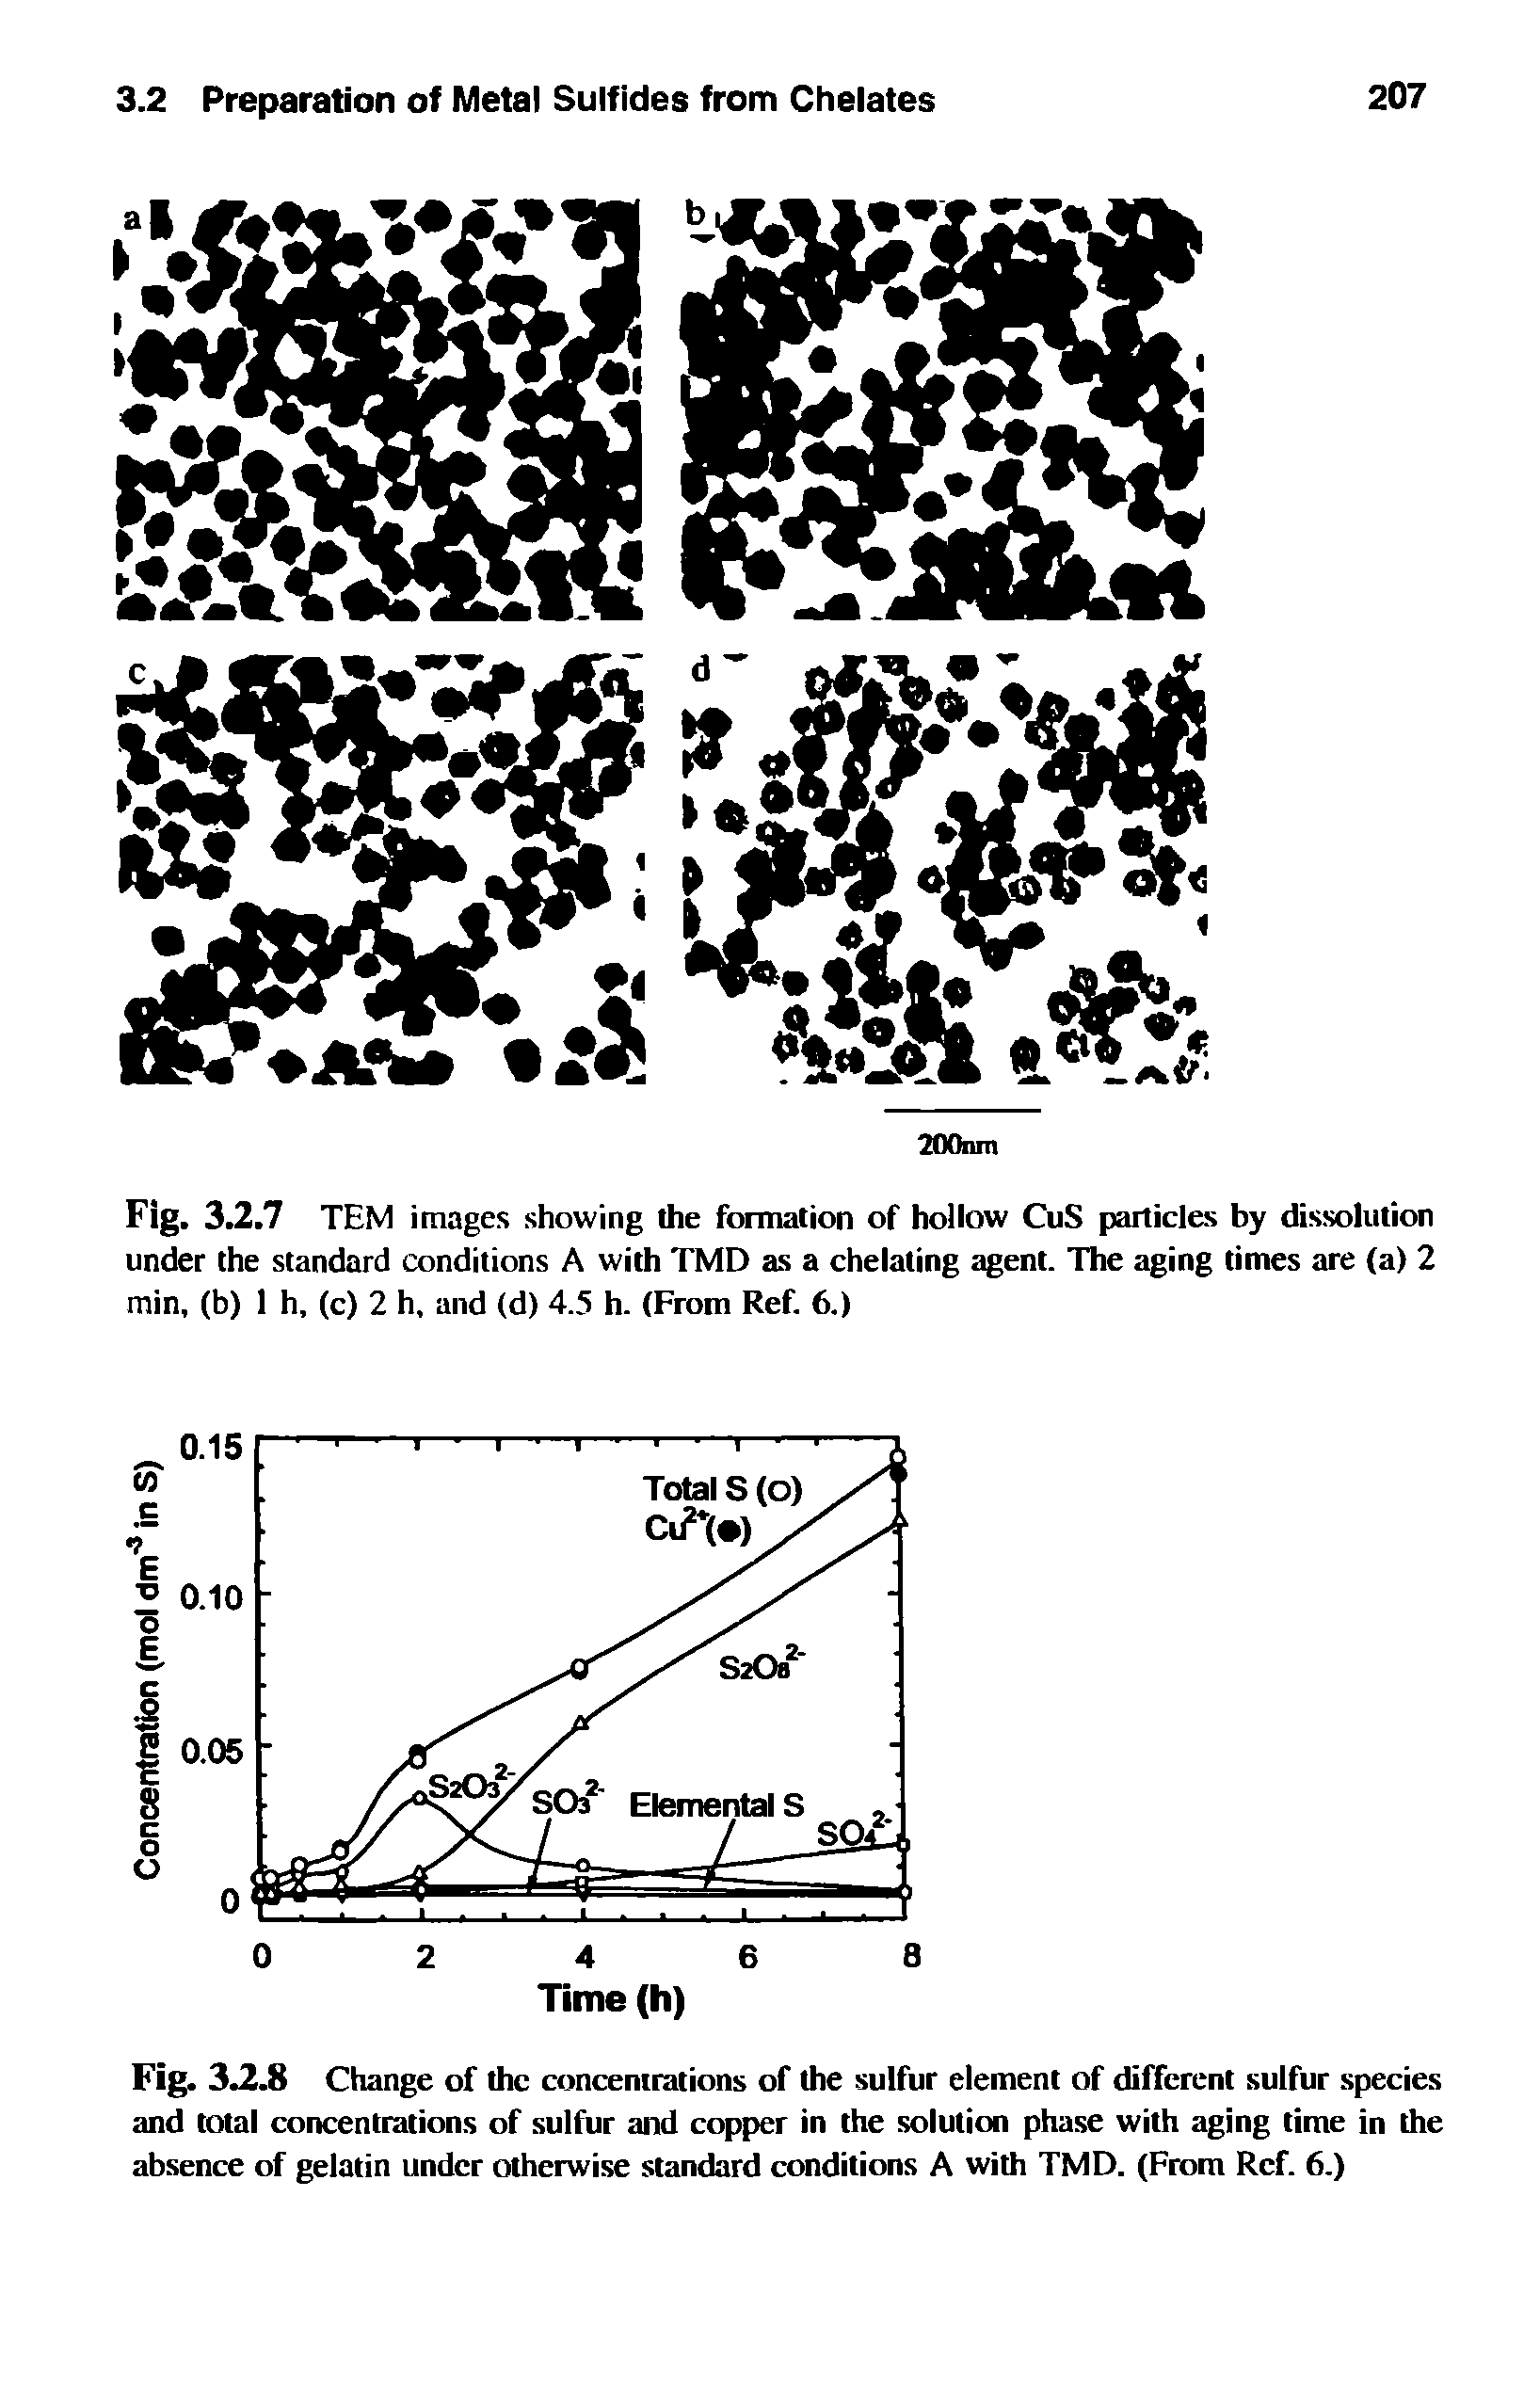 Fig. 3.2.8 Change of the concentrations of the sulfur element of different sulfur species and total concentrations of sulfur and copper in the solution phase with aging time in the absence of gelatin under otherwise standard conditions A with TMD. (From Ref. 6.)...